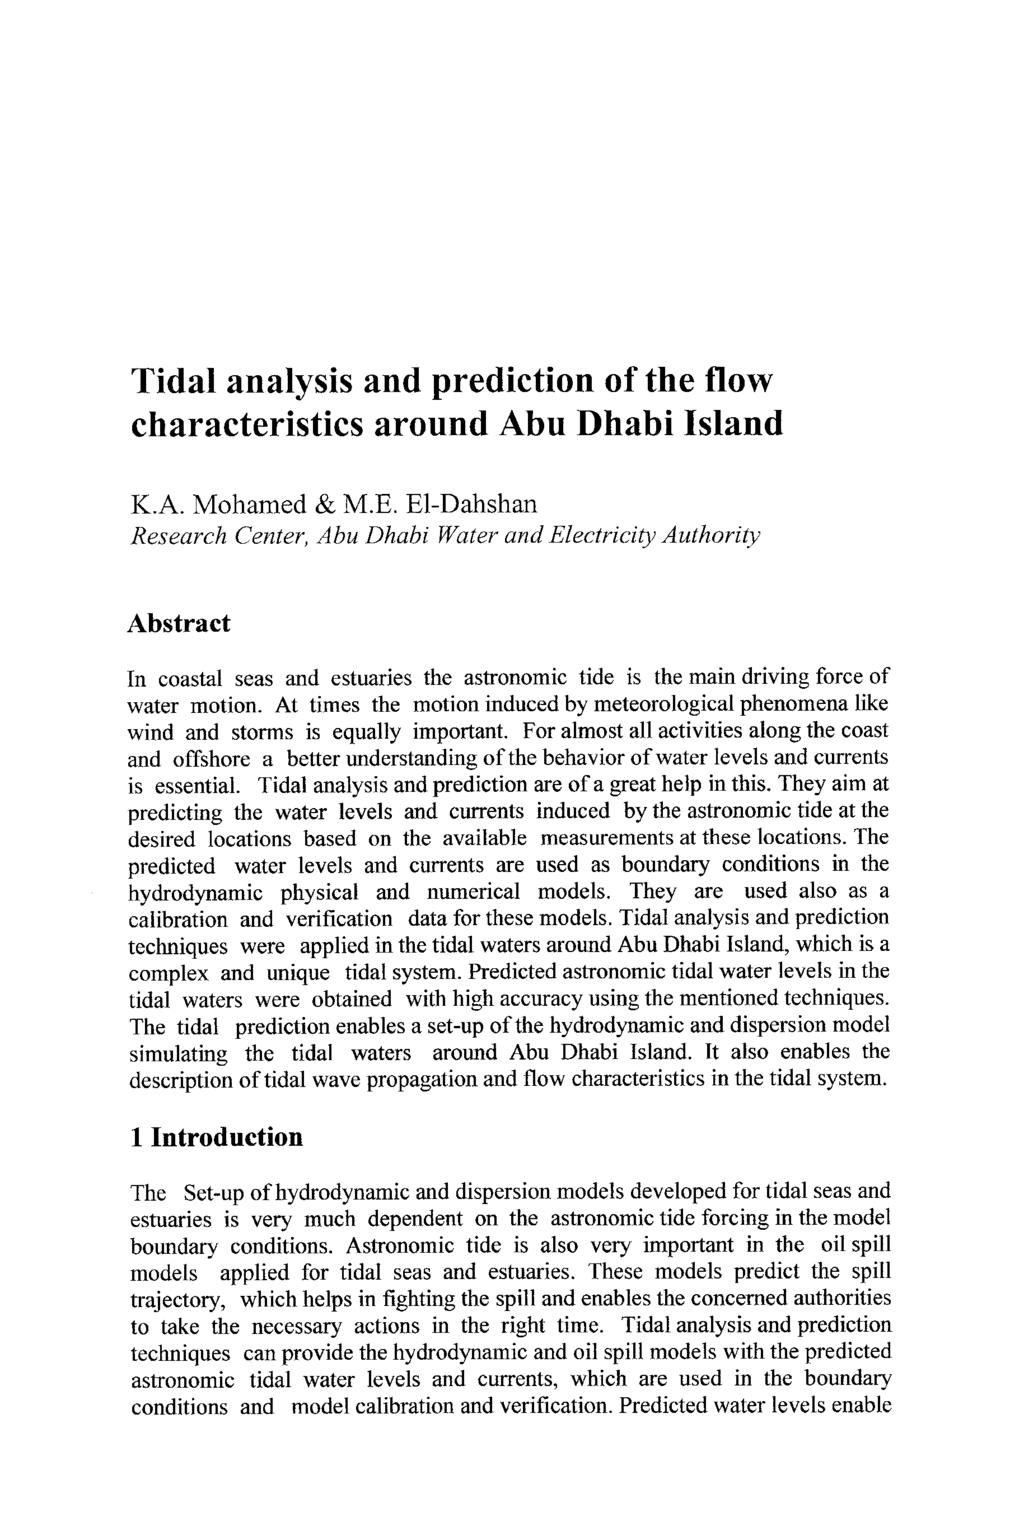 Tidal analysis and prediction of the flow characteristics around Abu Dhabi Island K.A. Mohamed & M.E.